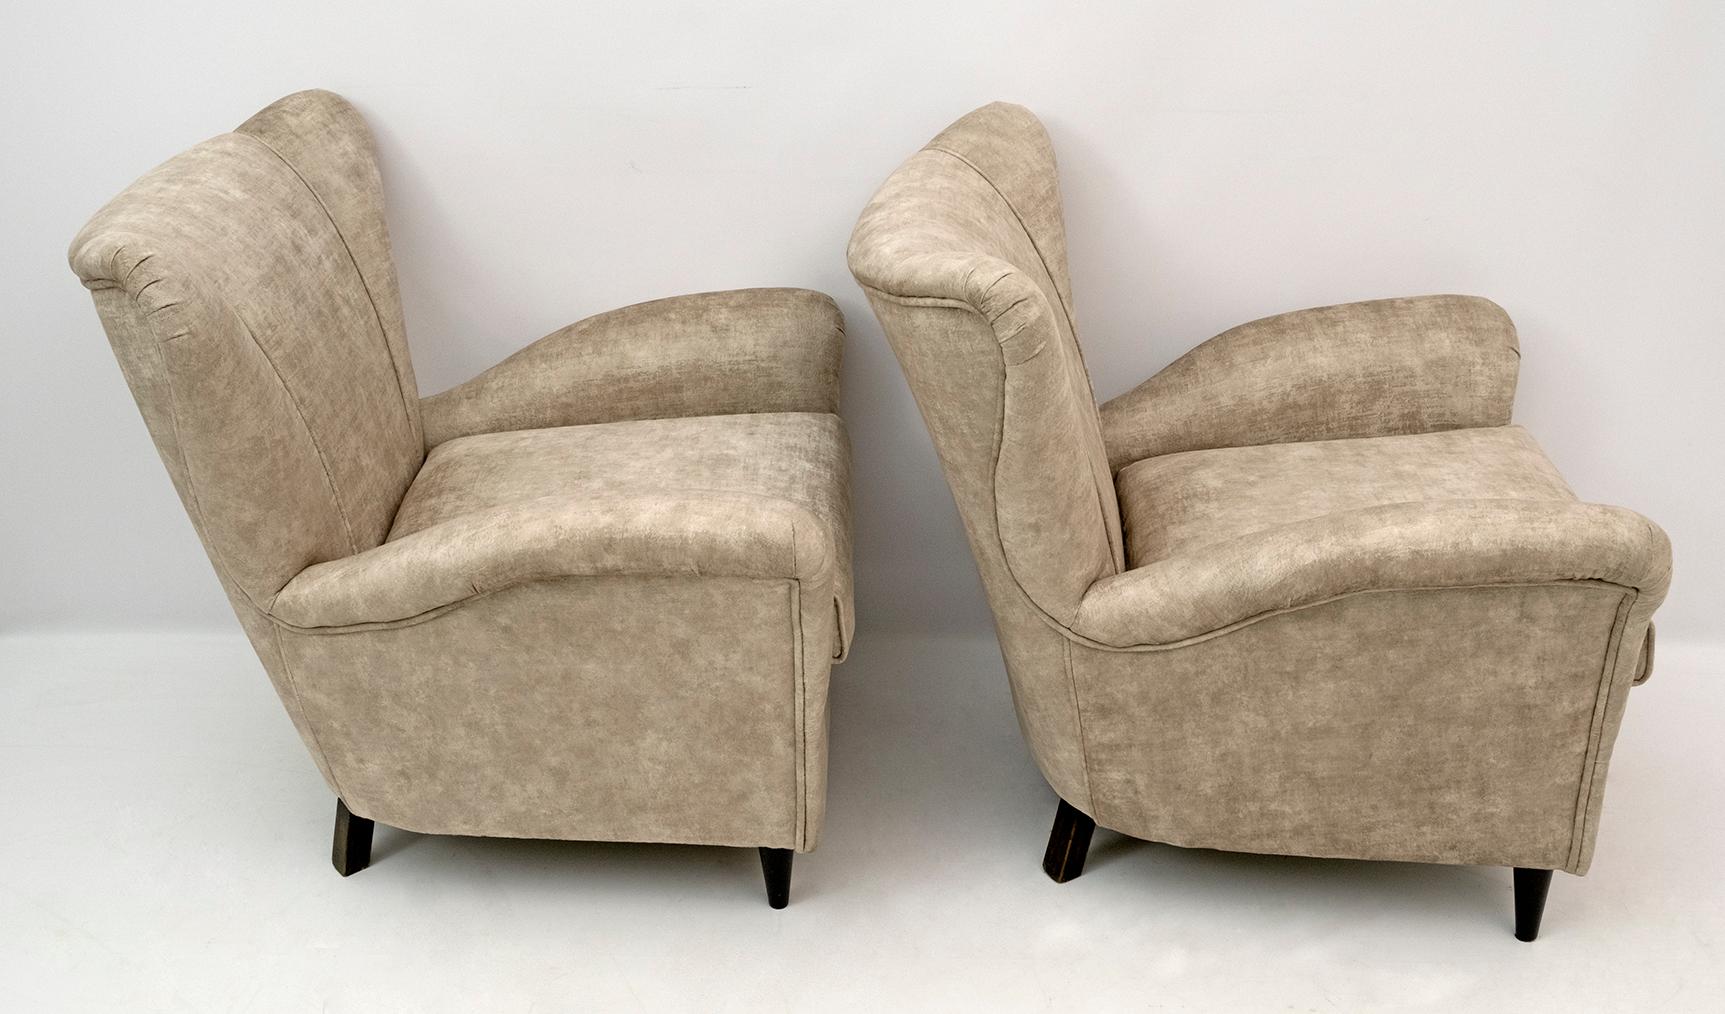 Attributed Gio Ponti Mid-Century Modern Italian Velvet Armchairs for ISA, Pair For Sale 2